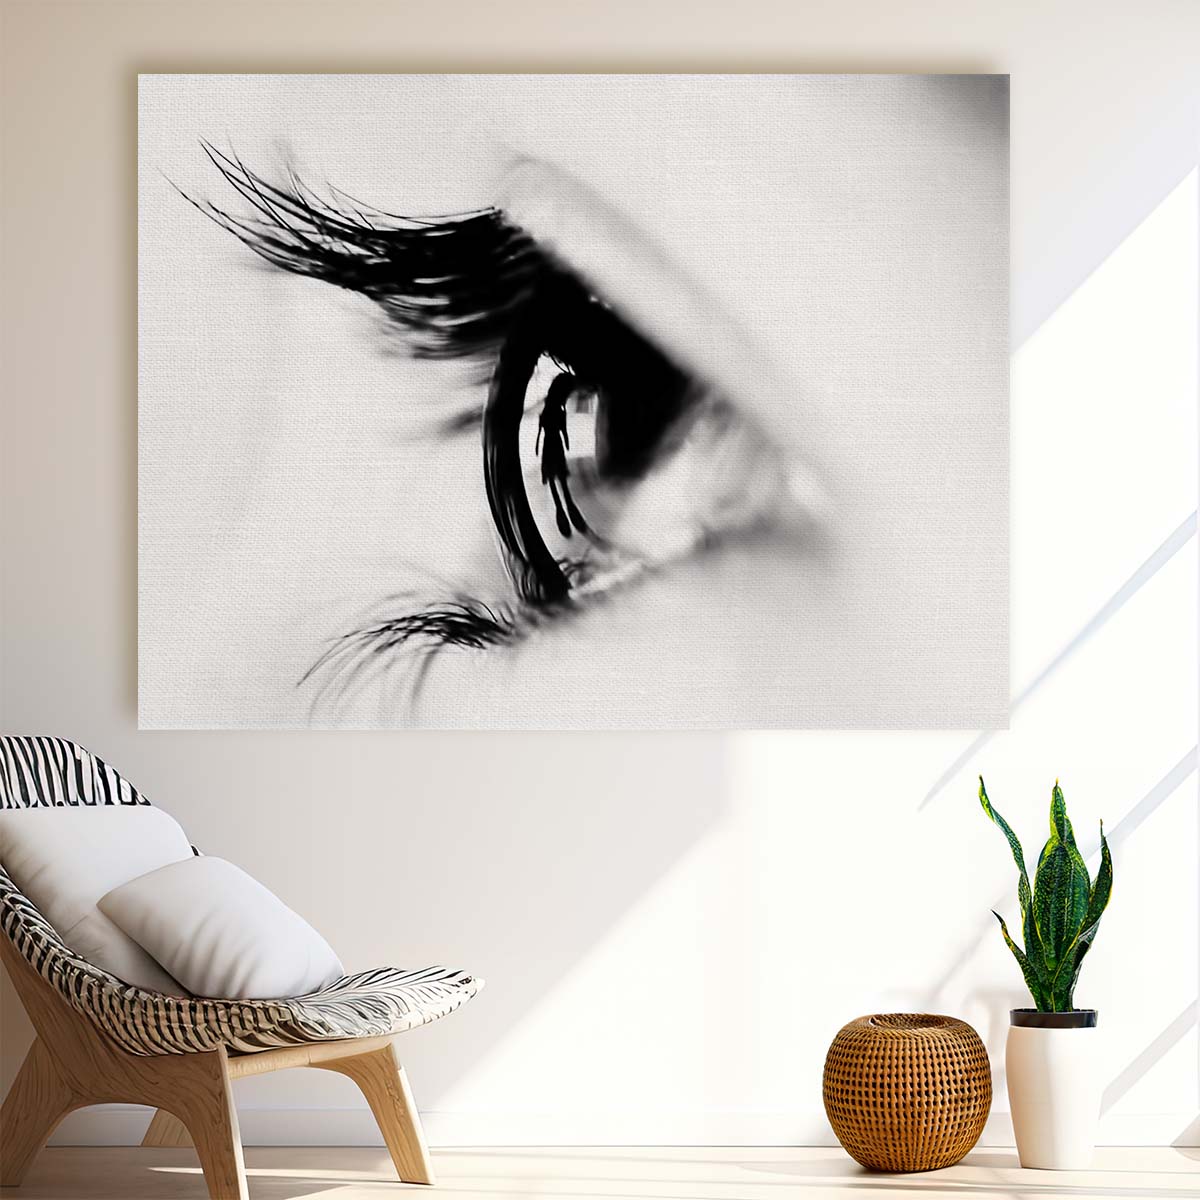 Monochrome Macro Girl Eye Reflection Wall Art by Luxuriance Designs. Made in USA.